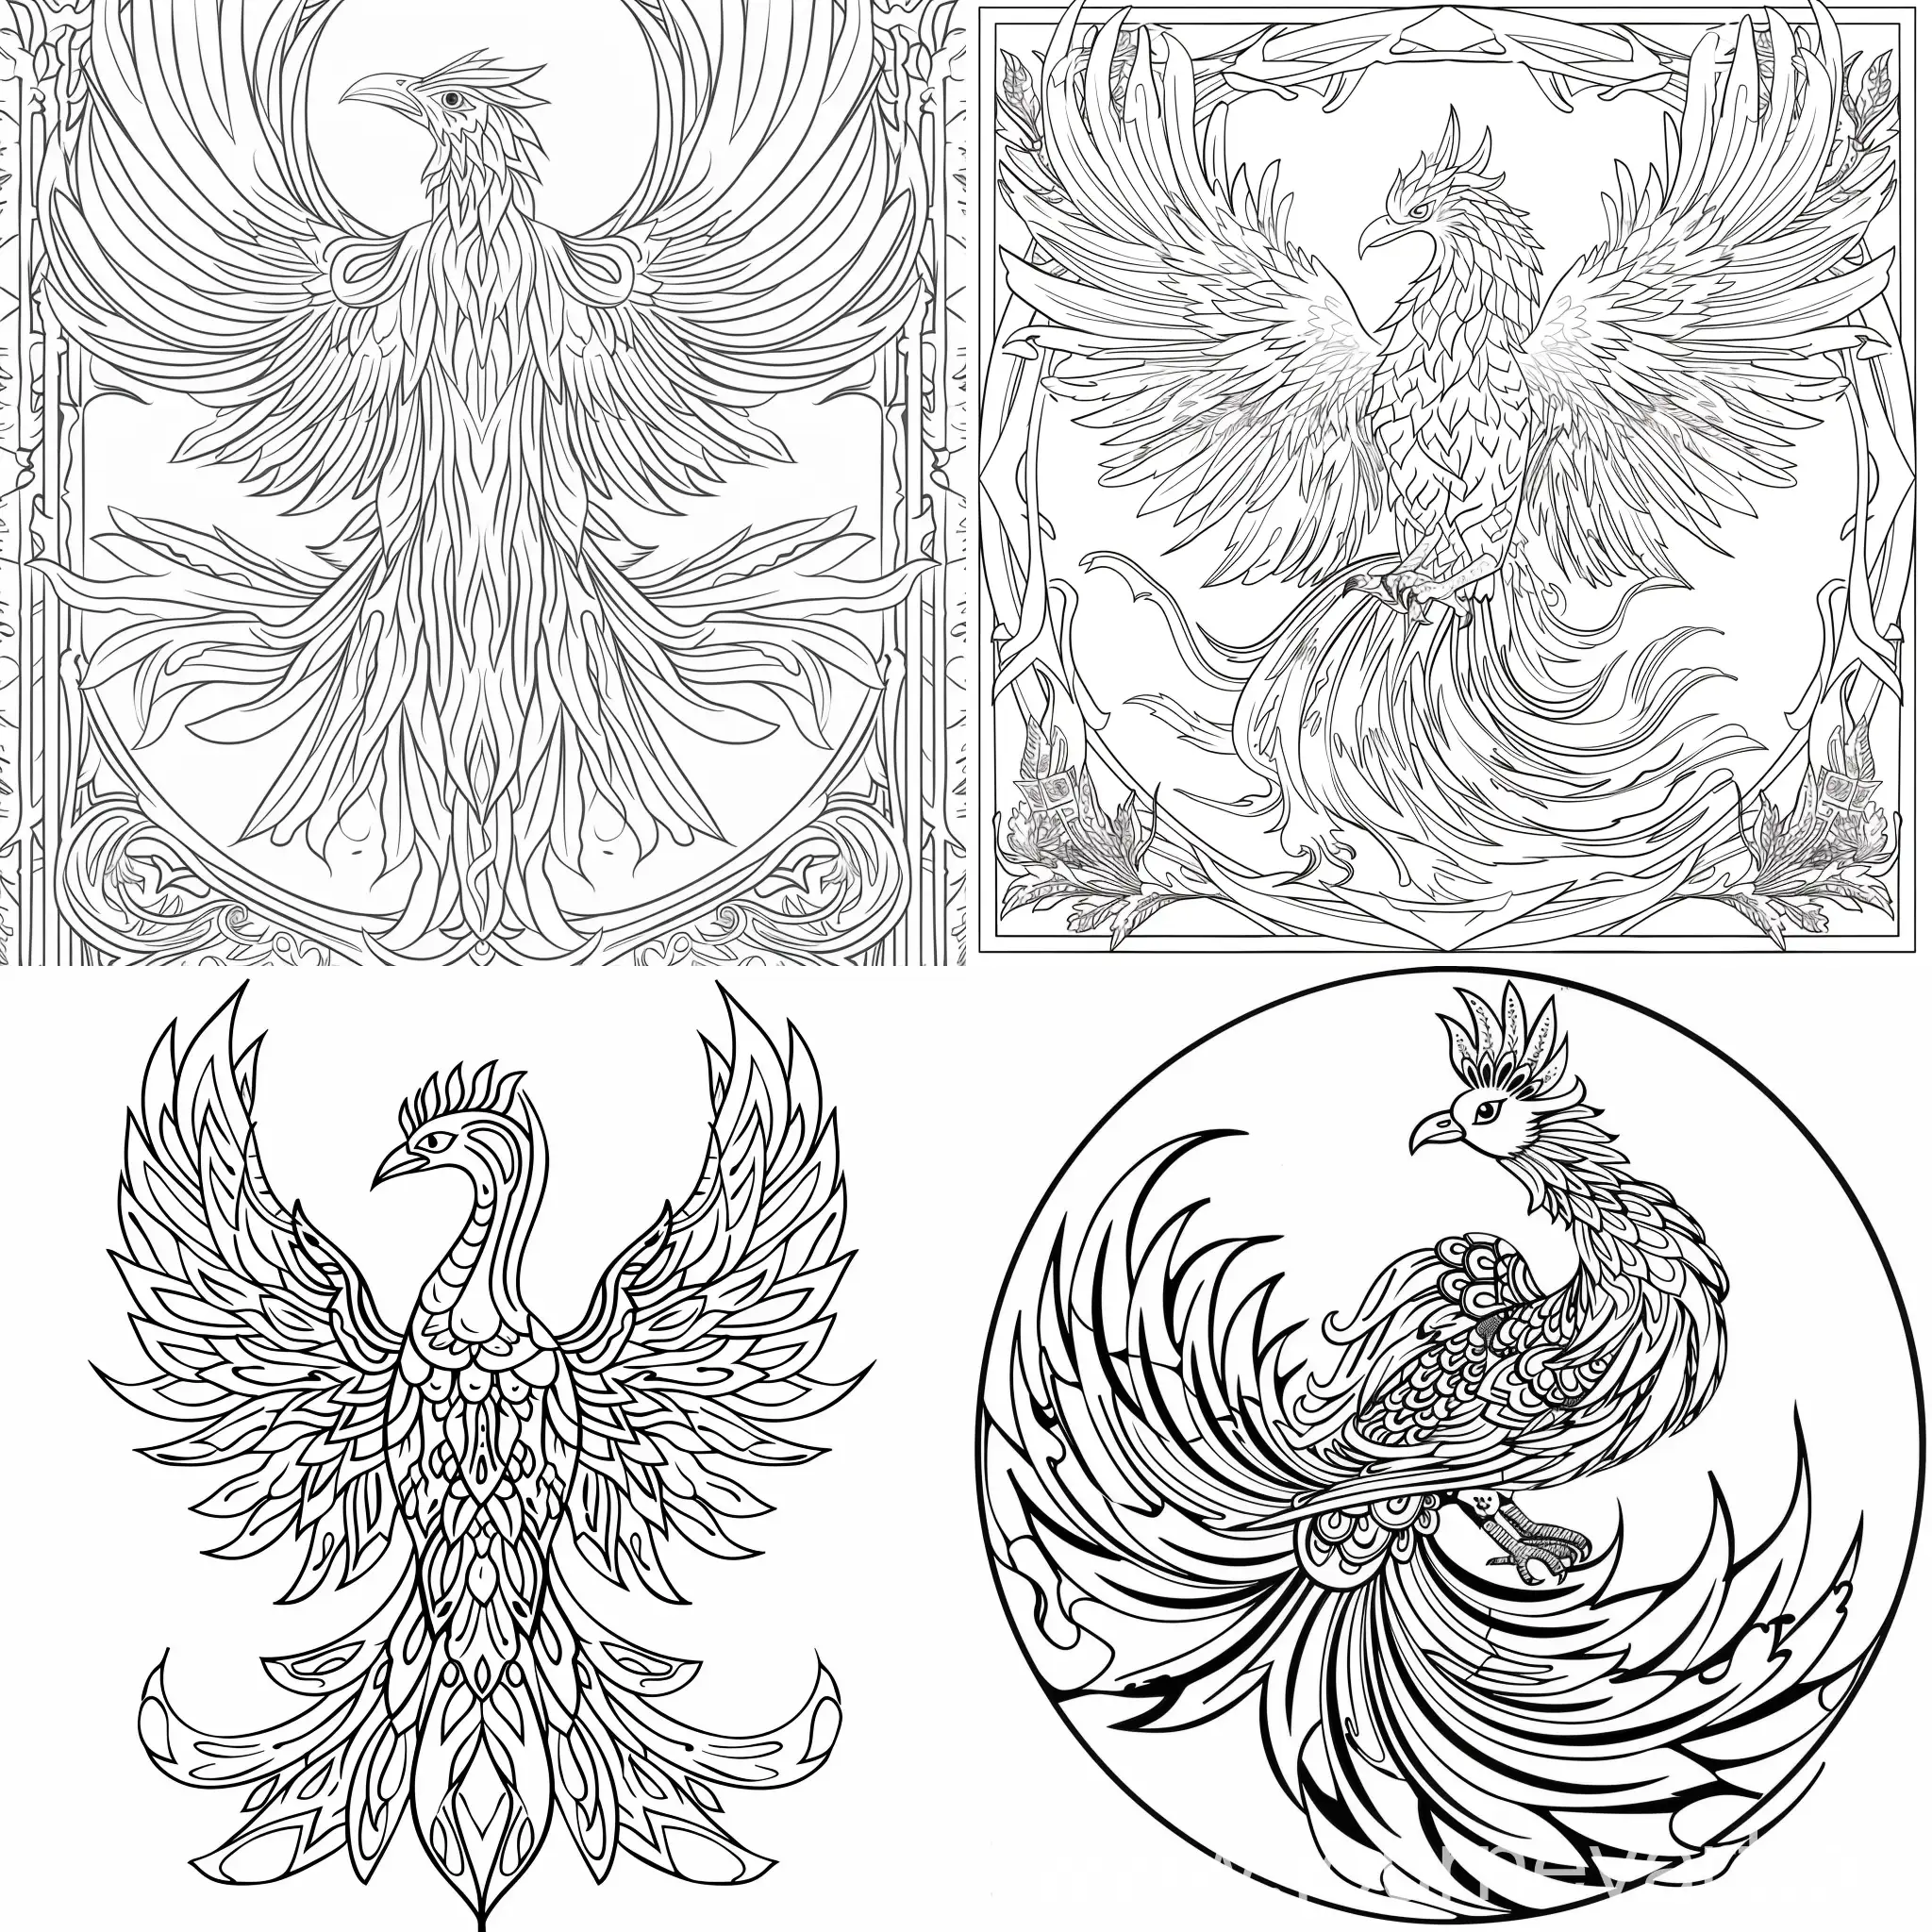 Majestic-Phoenix-Coloring-Page-with-Intricate-Details